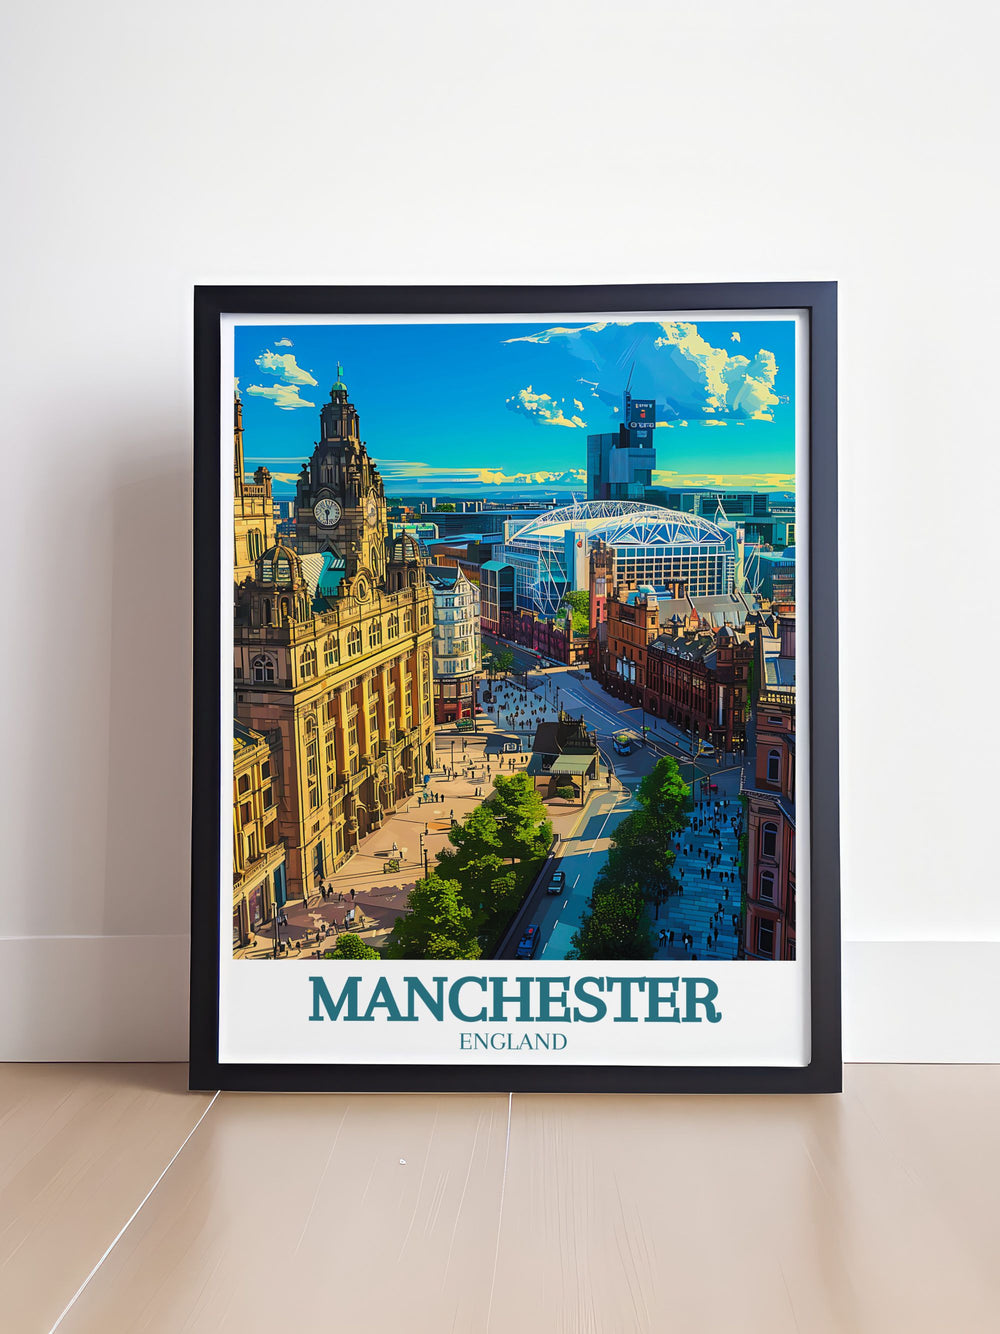 Retro travel poster featuring Manchester town hall and Old Trafford stadium ideal for enhancing home decor with a touch of historical and sporting significance a perfect addition for those who appreciate Manchesters rich heritage.